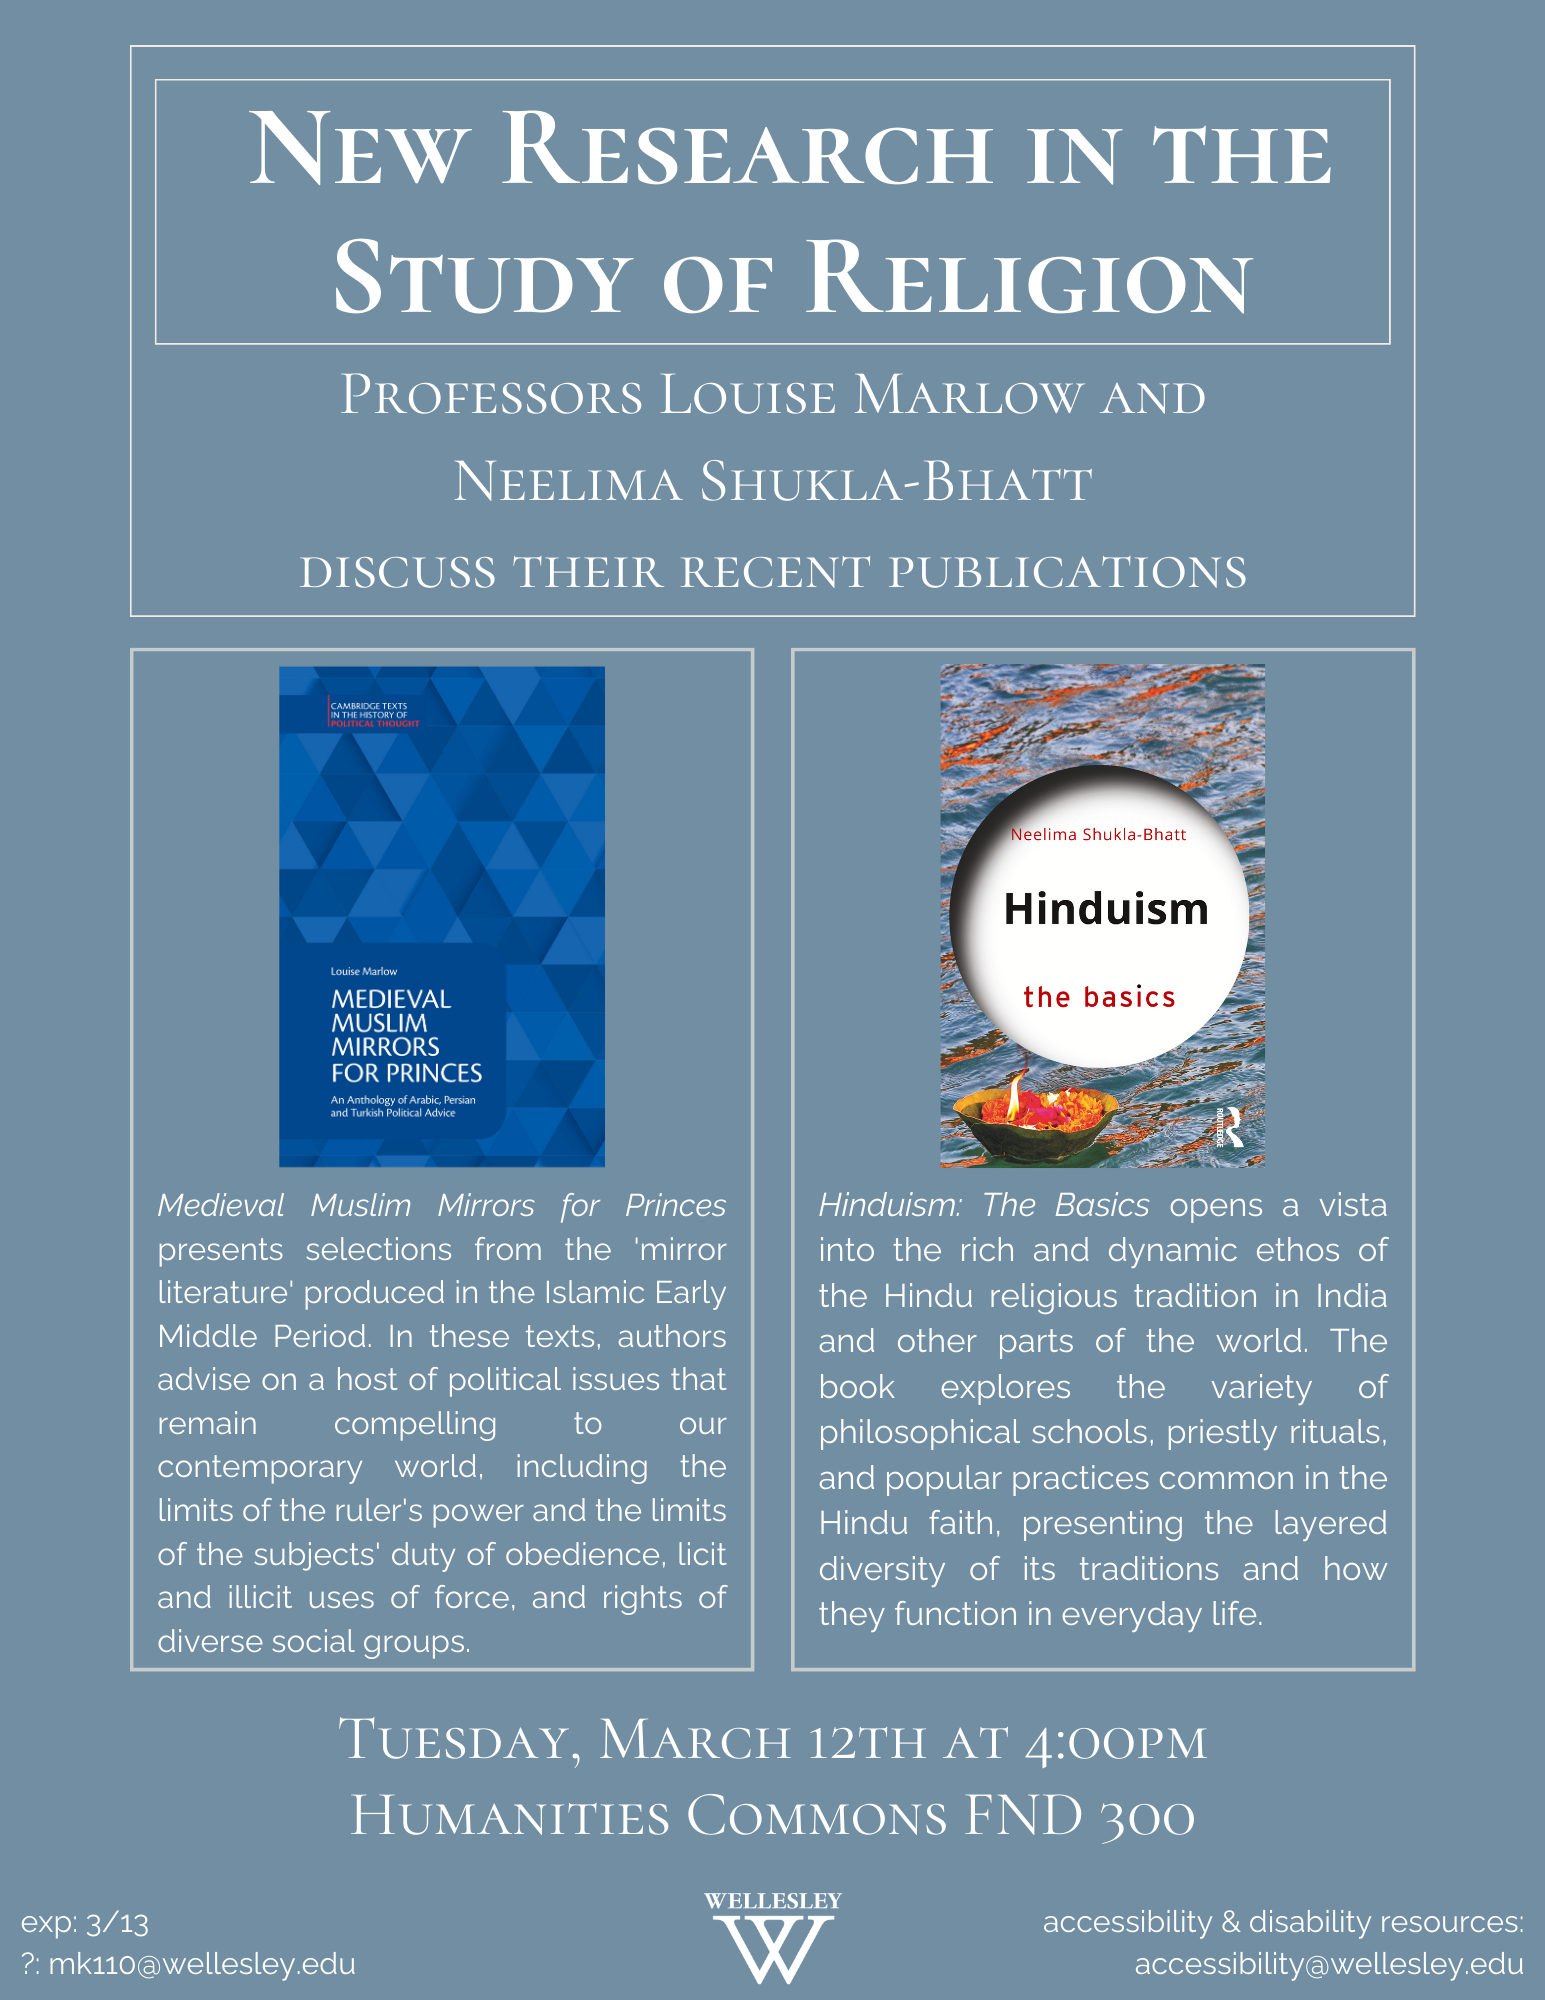 2024 Lecture by Professors Louise Marlow and Neelima Shukla-Bhatt New Research in the Study of Religion